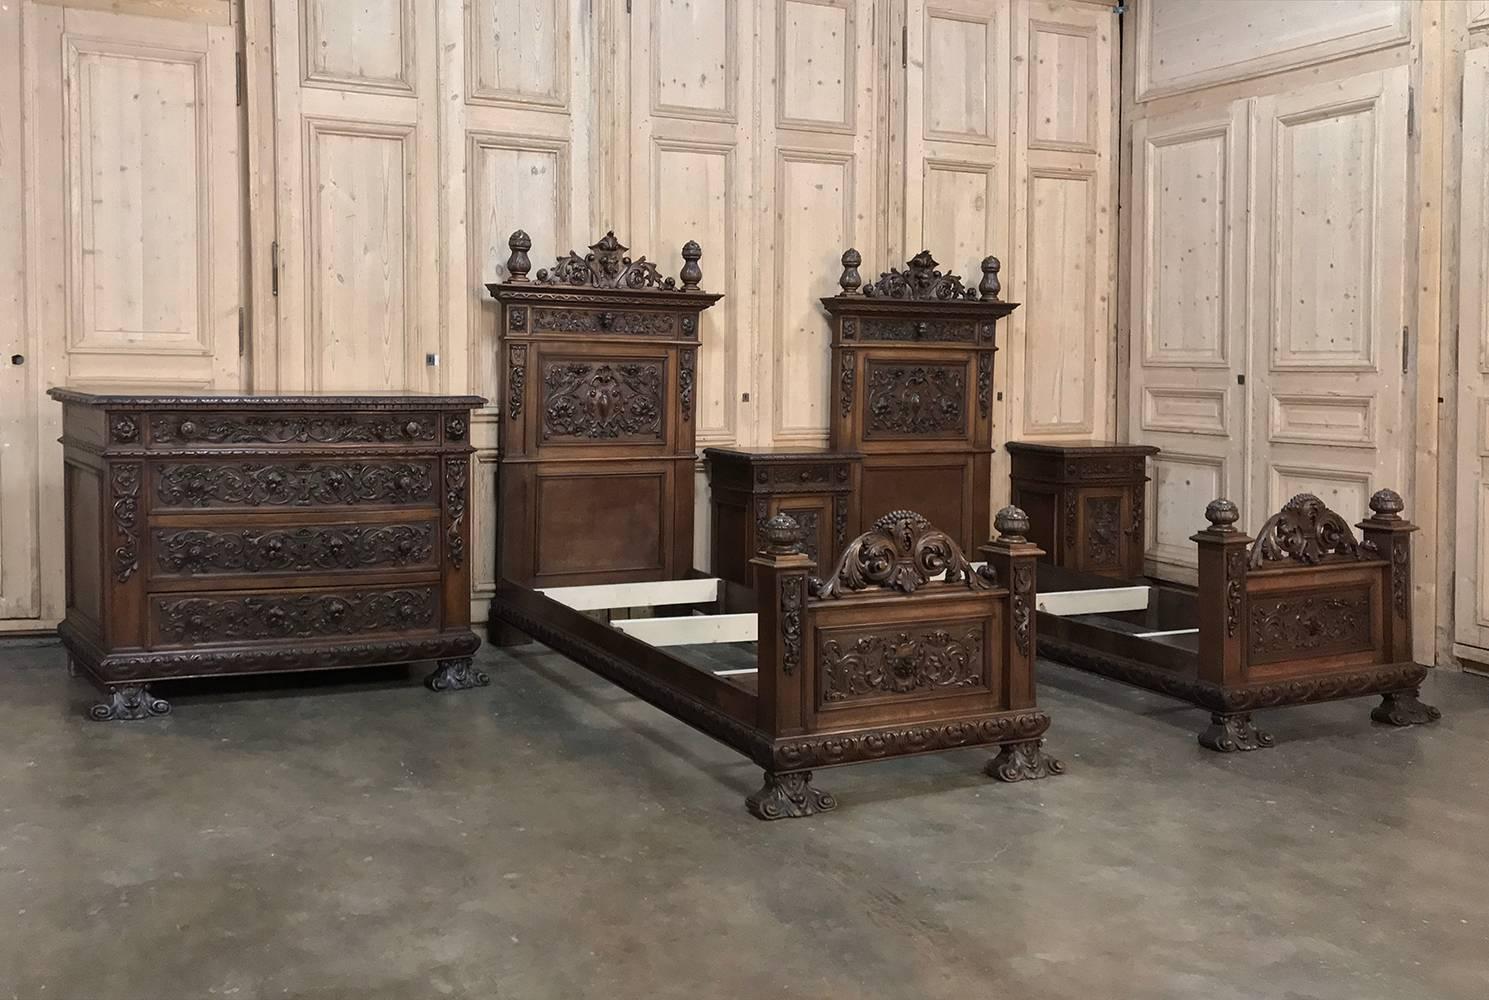 Pair of 19th century Italian renaissance walnut beds represent the essence of the style with elaborately carved bas relief and full relief naturalistic motifs across the entire visible facades of the head and footboards, even on the scrolled feet